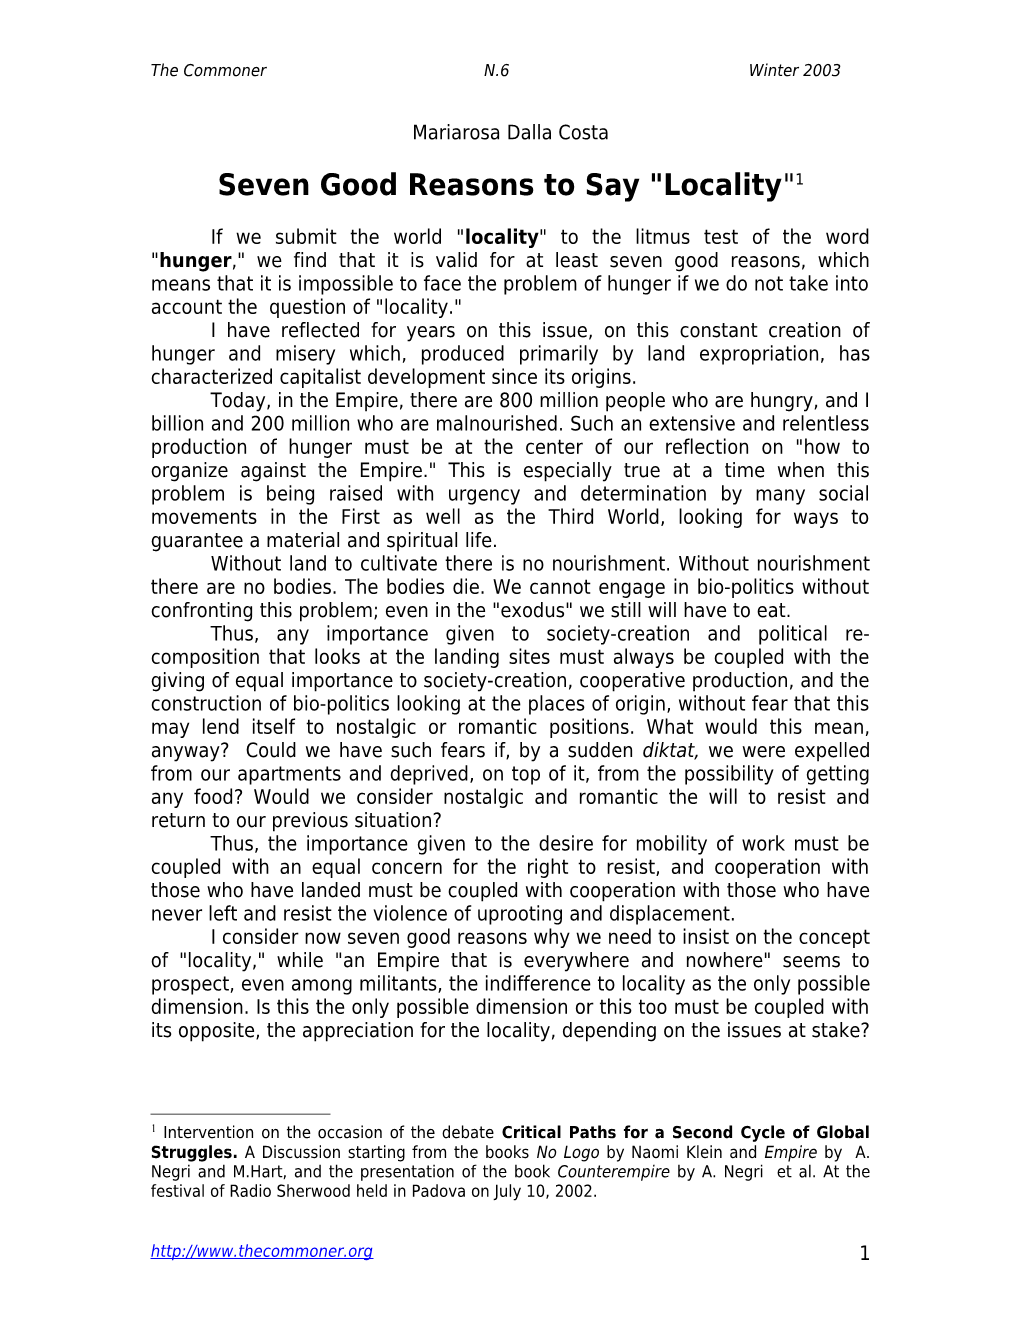 Seven Good Reasons to Say Place